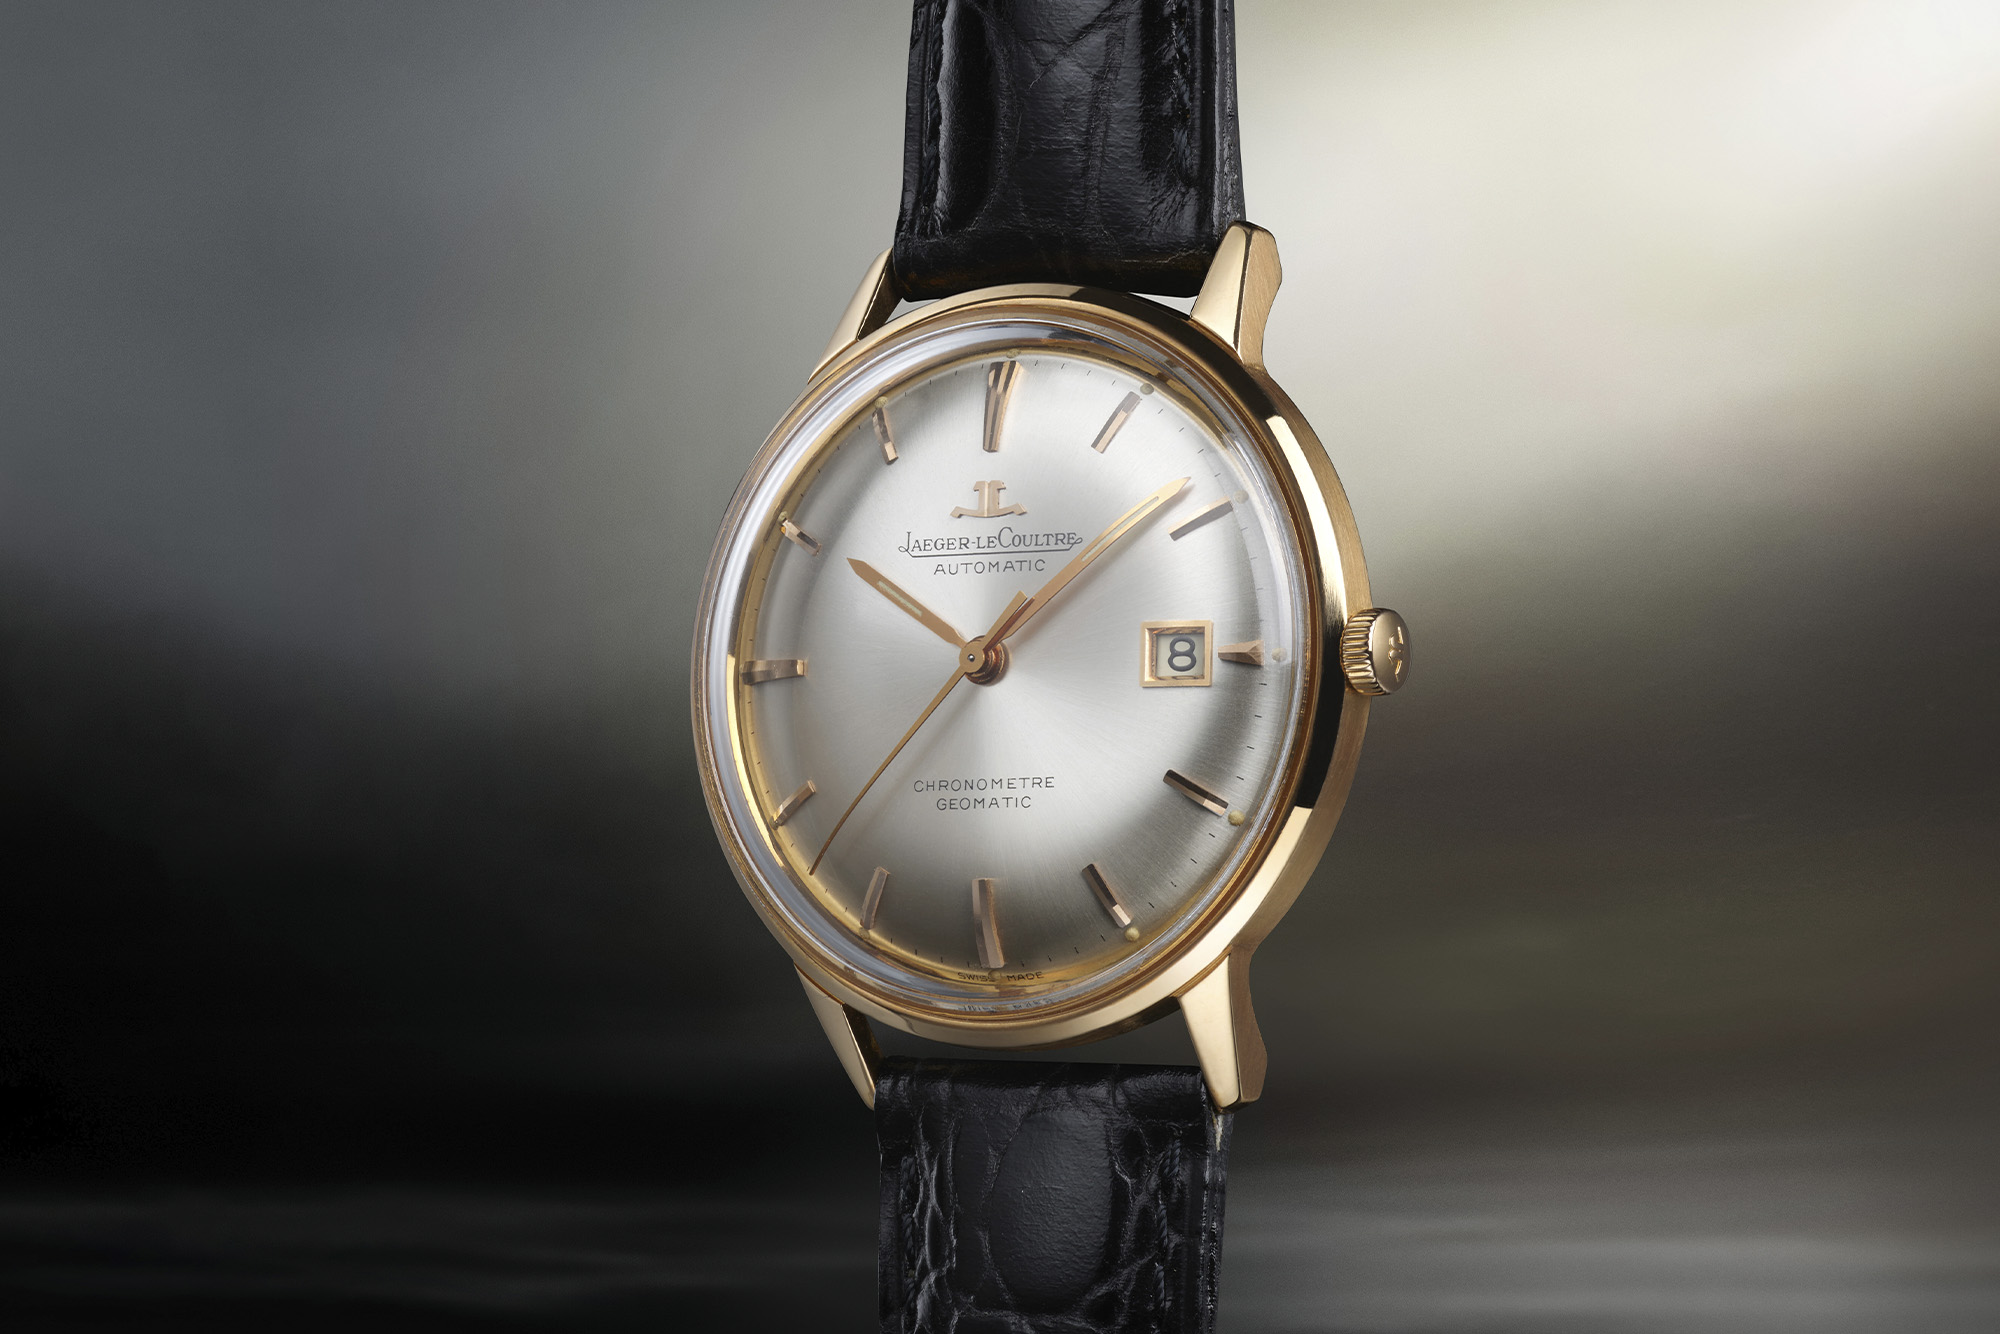 Jaeger-LeCoultre watch with gold rim and white dial